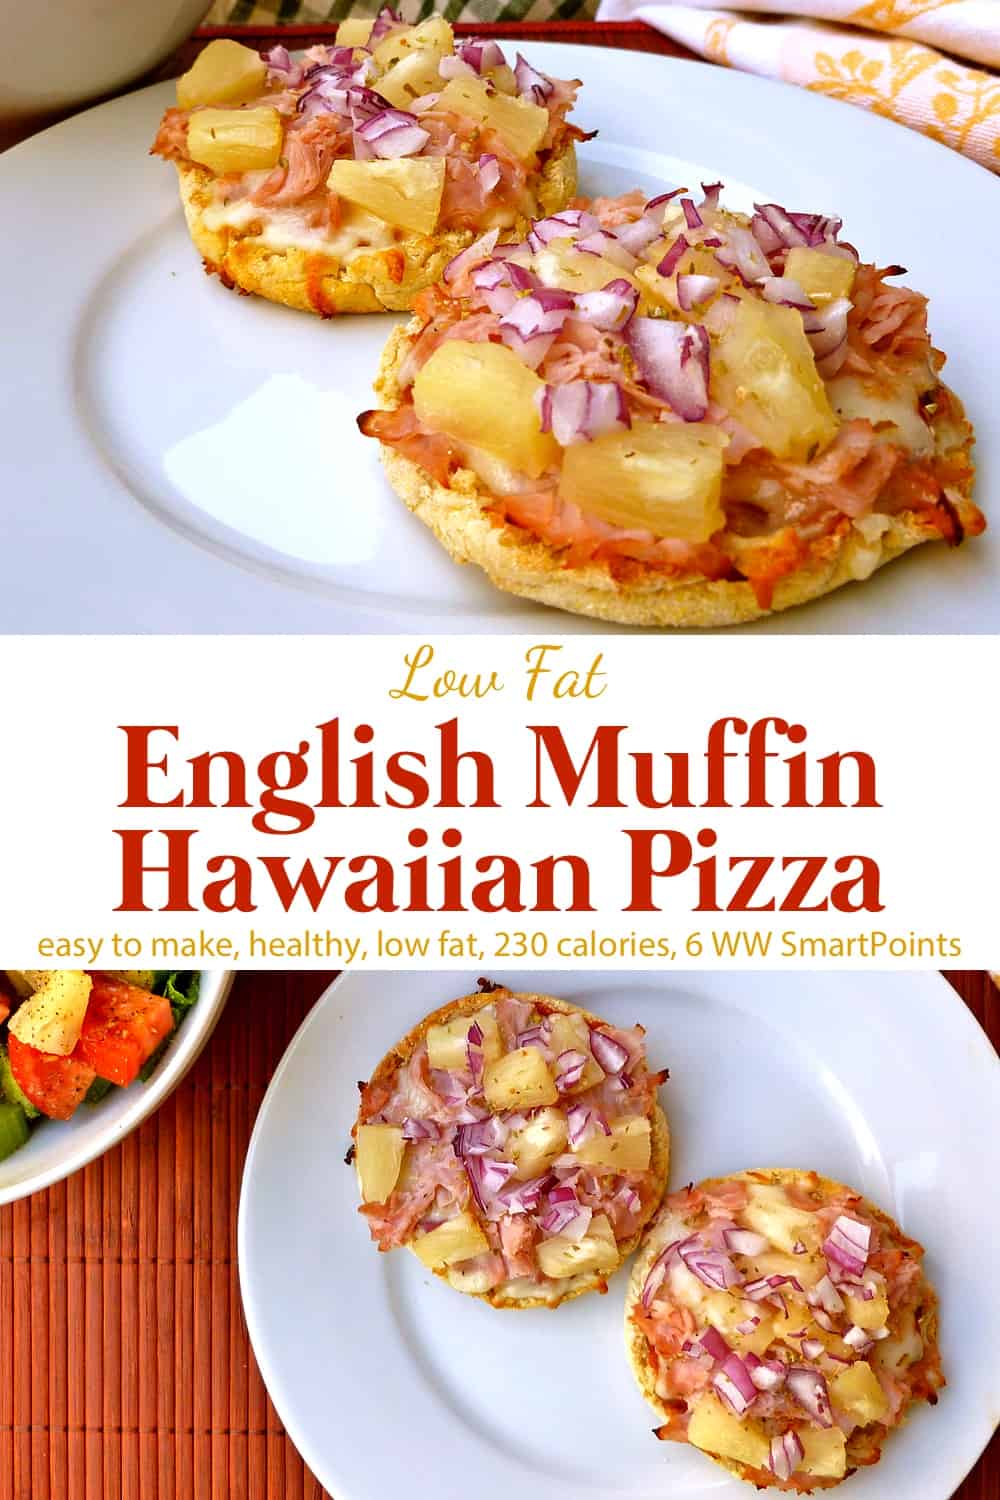 English muffin Hawaiian pizza on white plate with side salad.